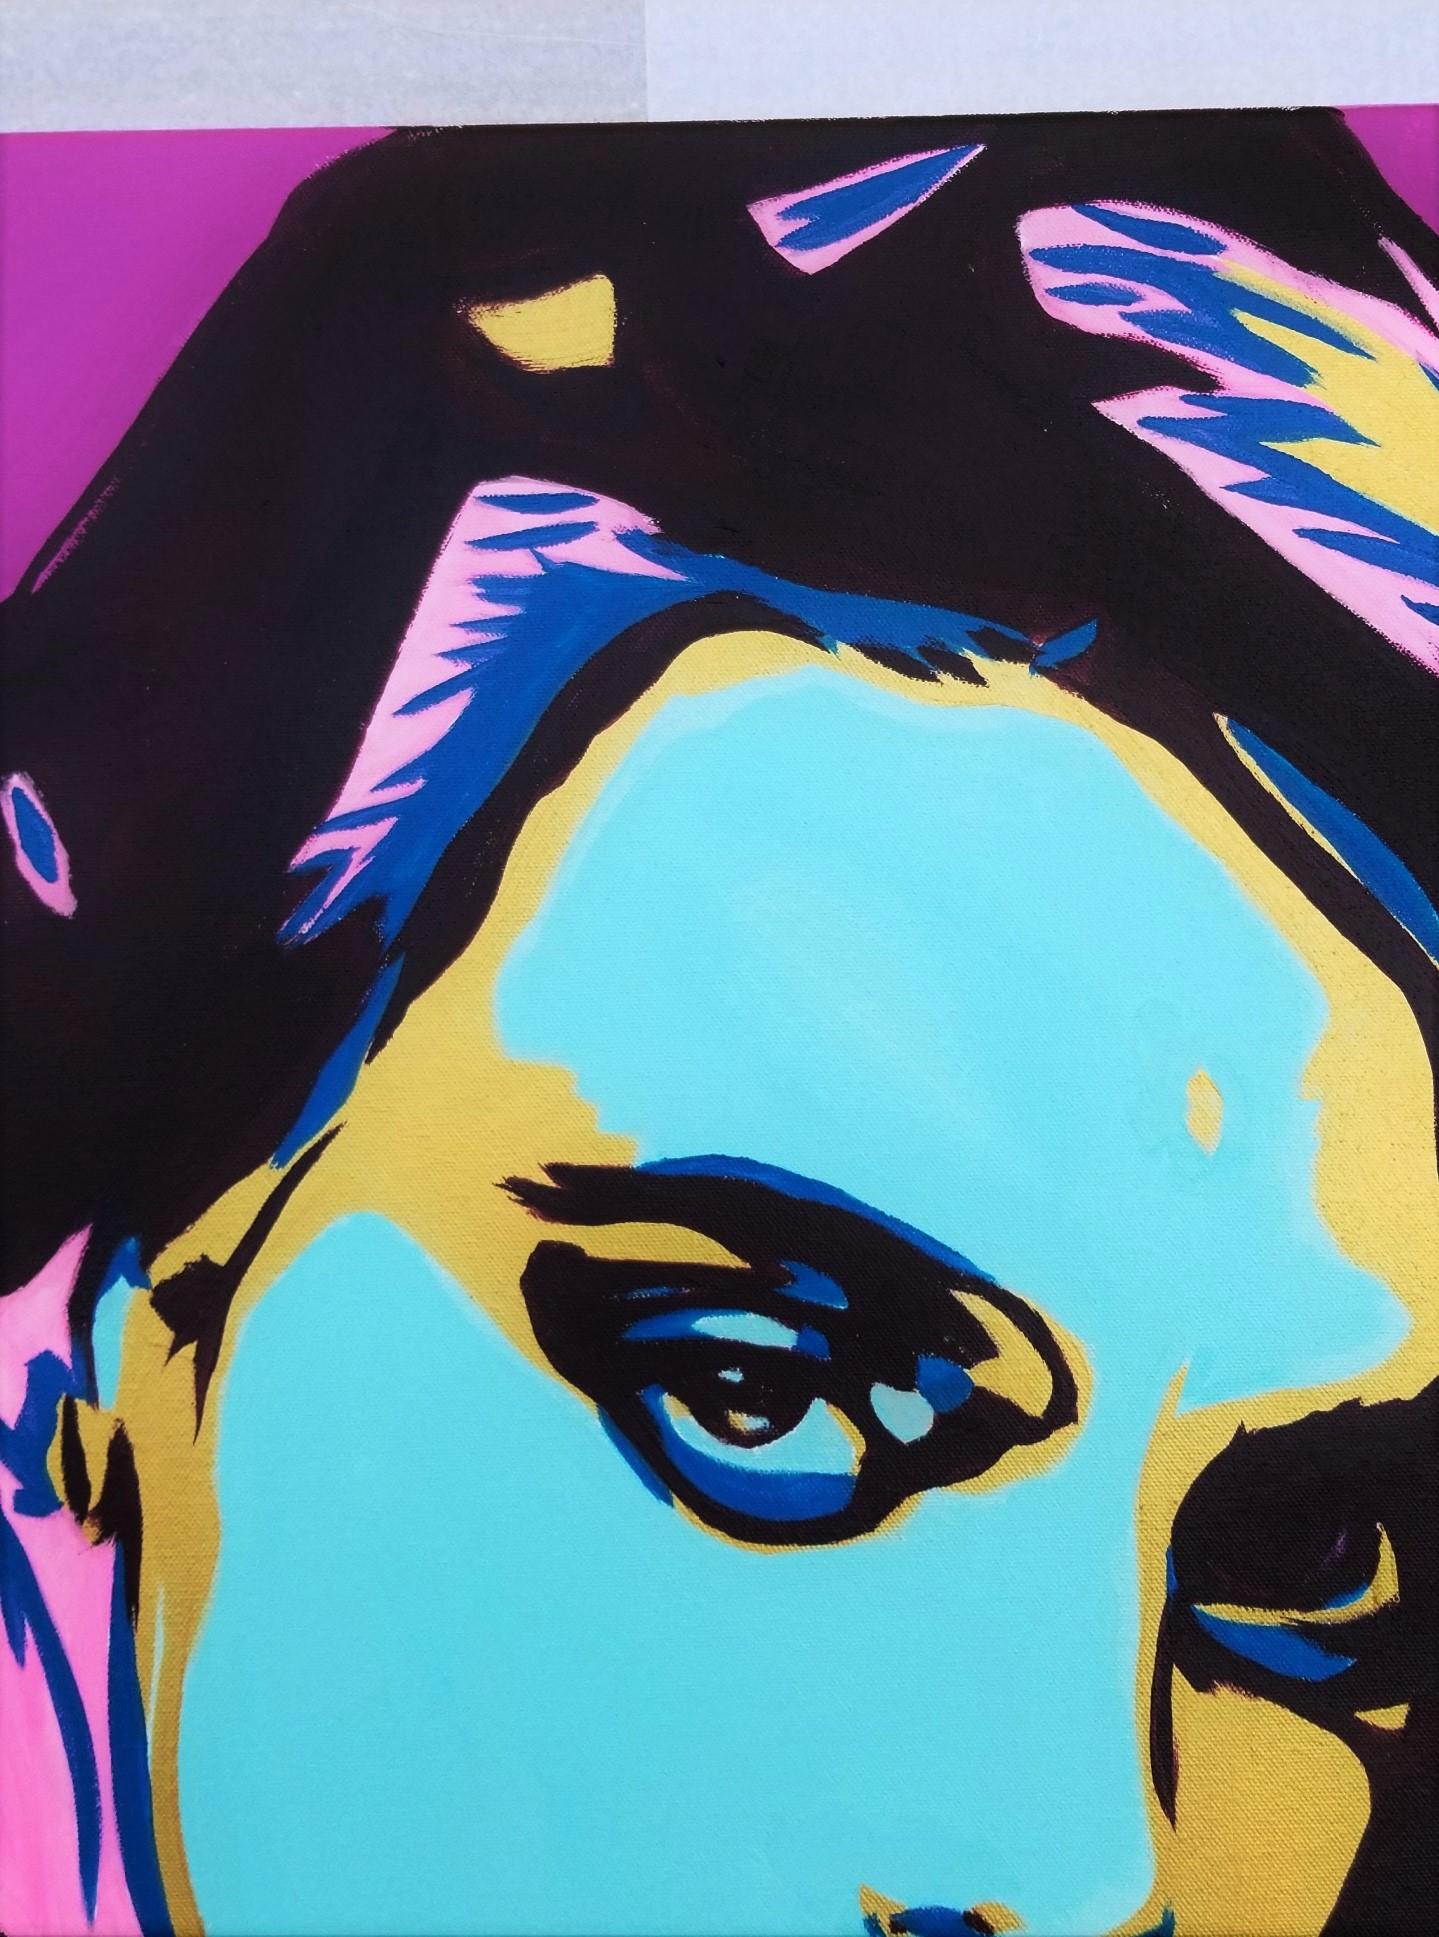 Cara Delevingne Icon XIV /// Contemporary Street Pop Art Actress Fashion Model - Blue Portrait Painting by Jack Graves III